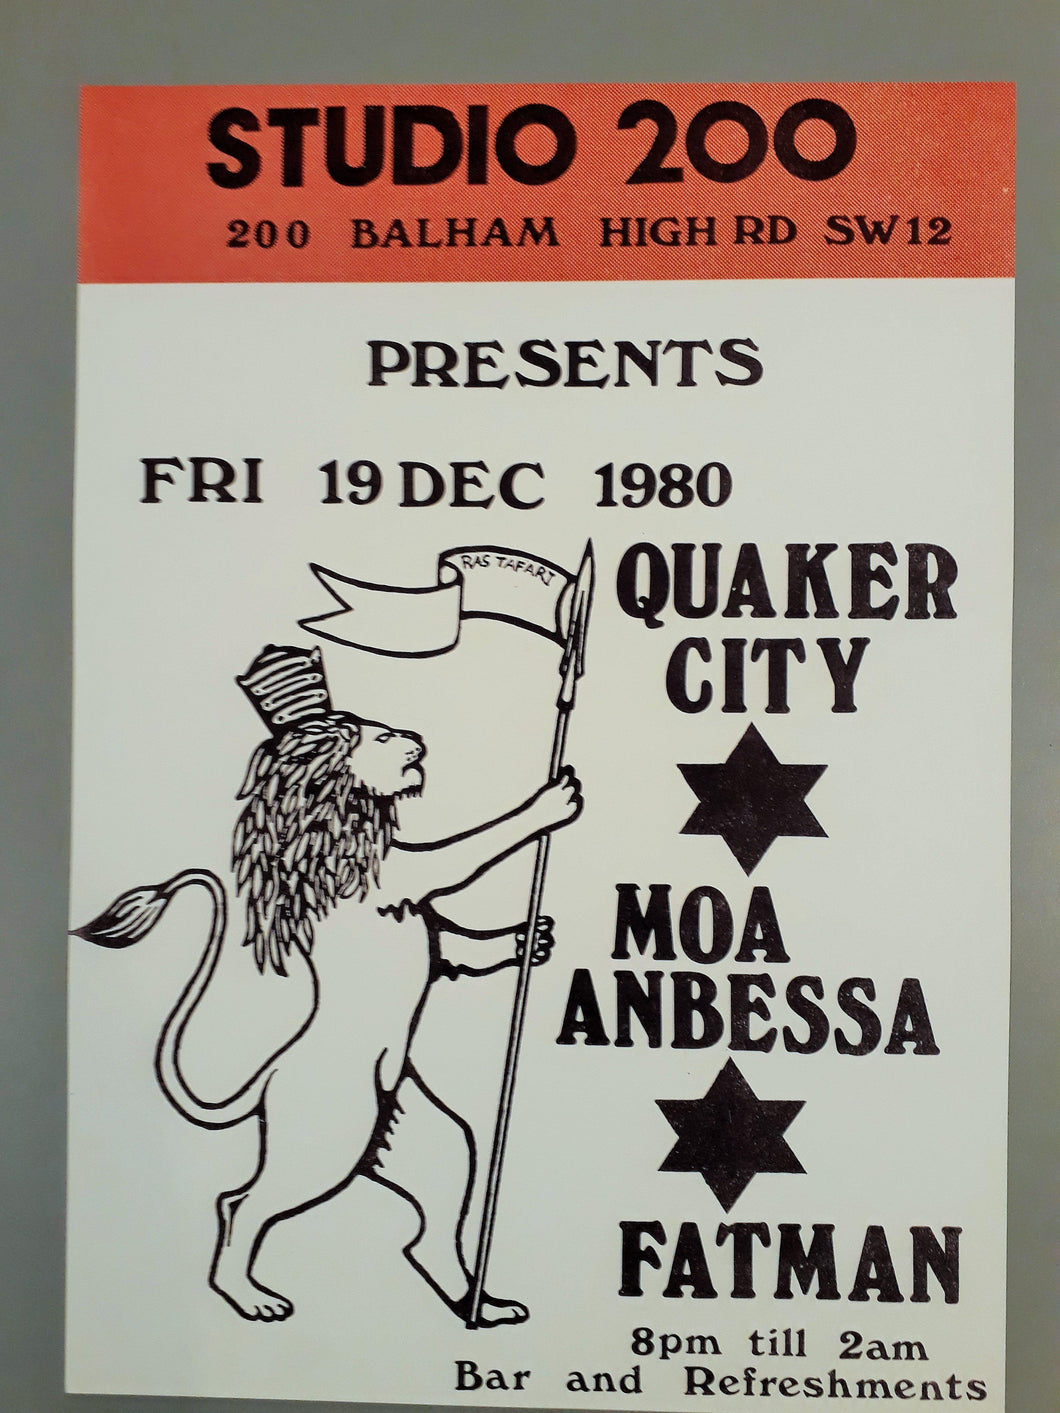 Reggae promotional concert poster - Studio 200 with Fatman & Quaker City 1980 A3 reprint - Original Music and Movie Posters for sale from Bamalama - Online Poster Store UK London